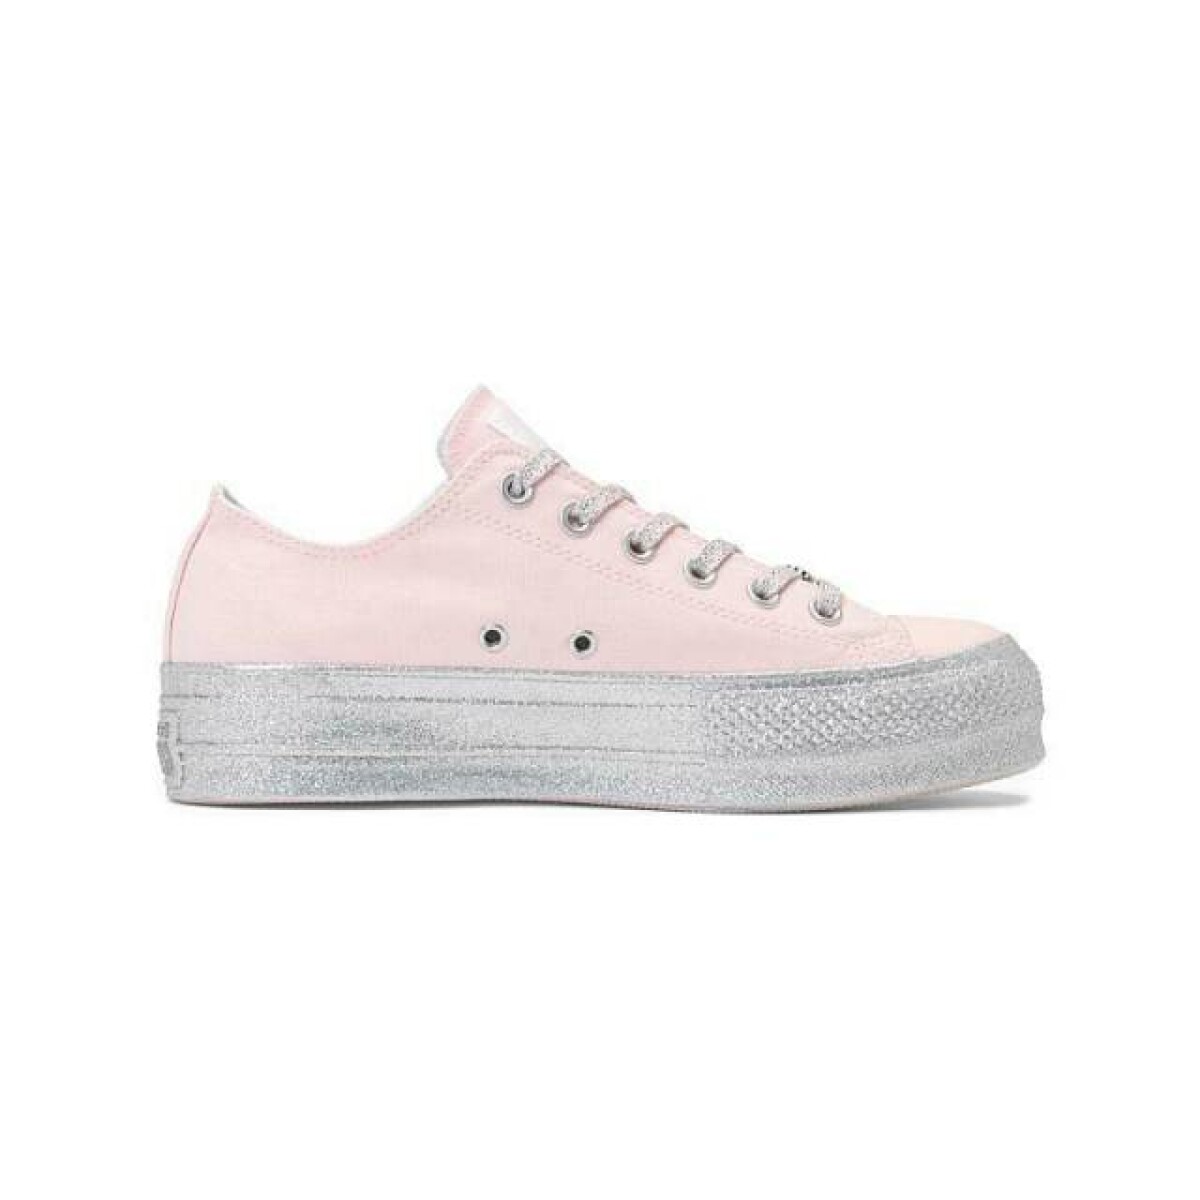 Championes Converse By Miley Cyrus 562237C - PINK/WHITE 